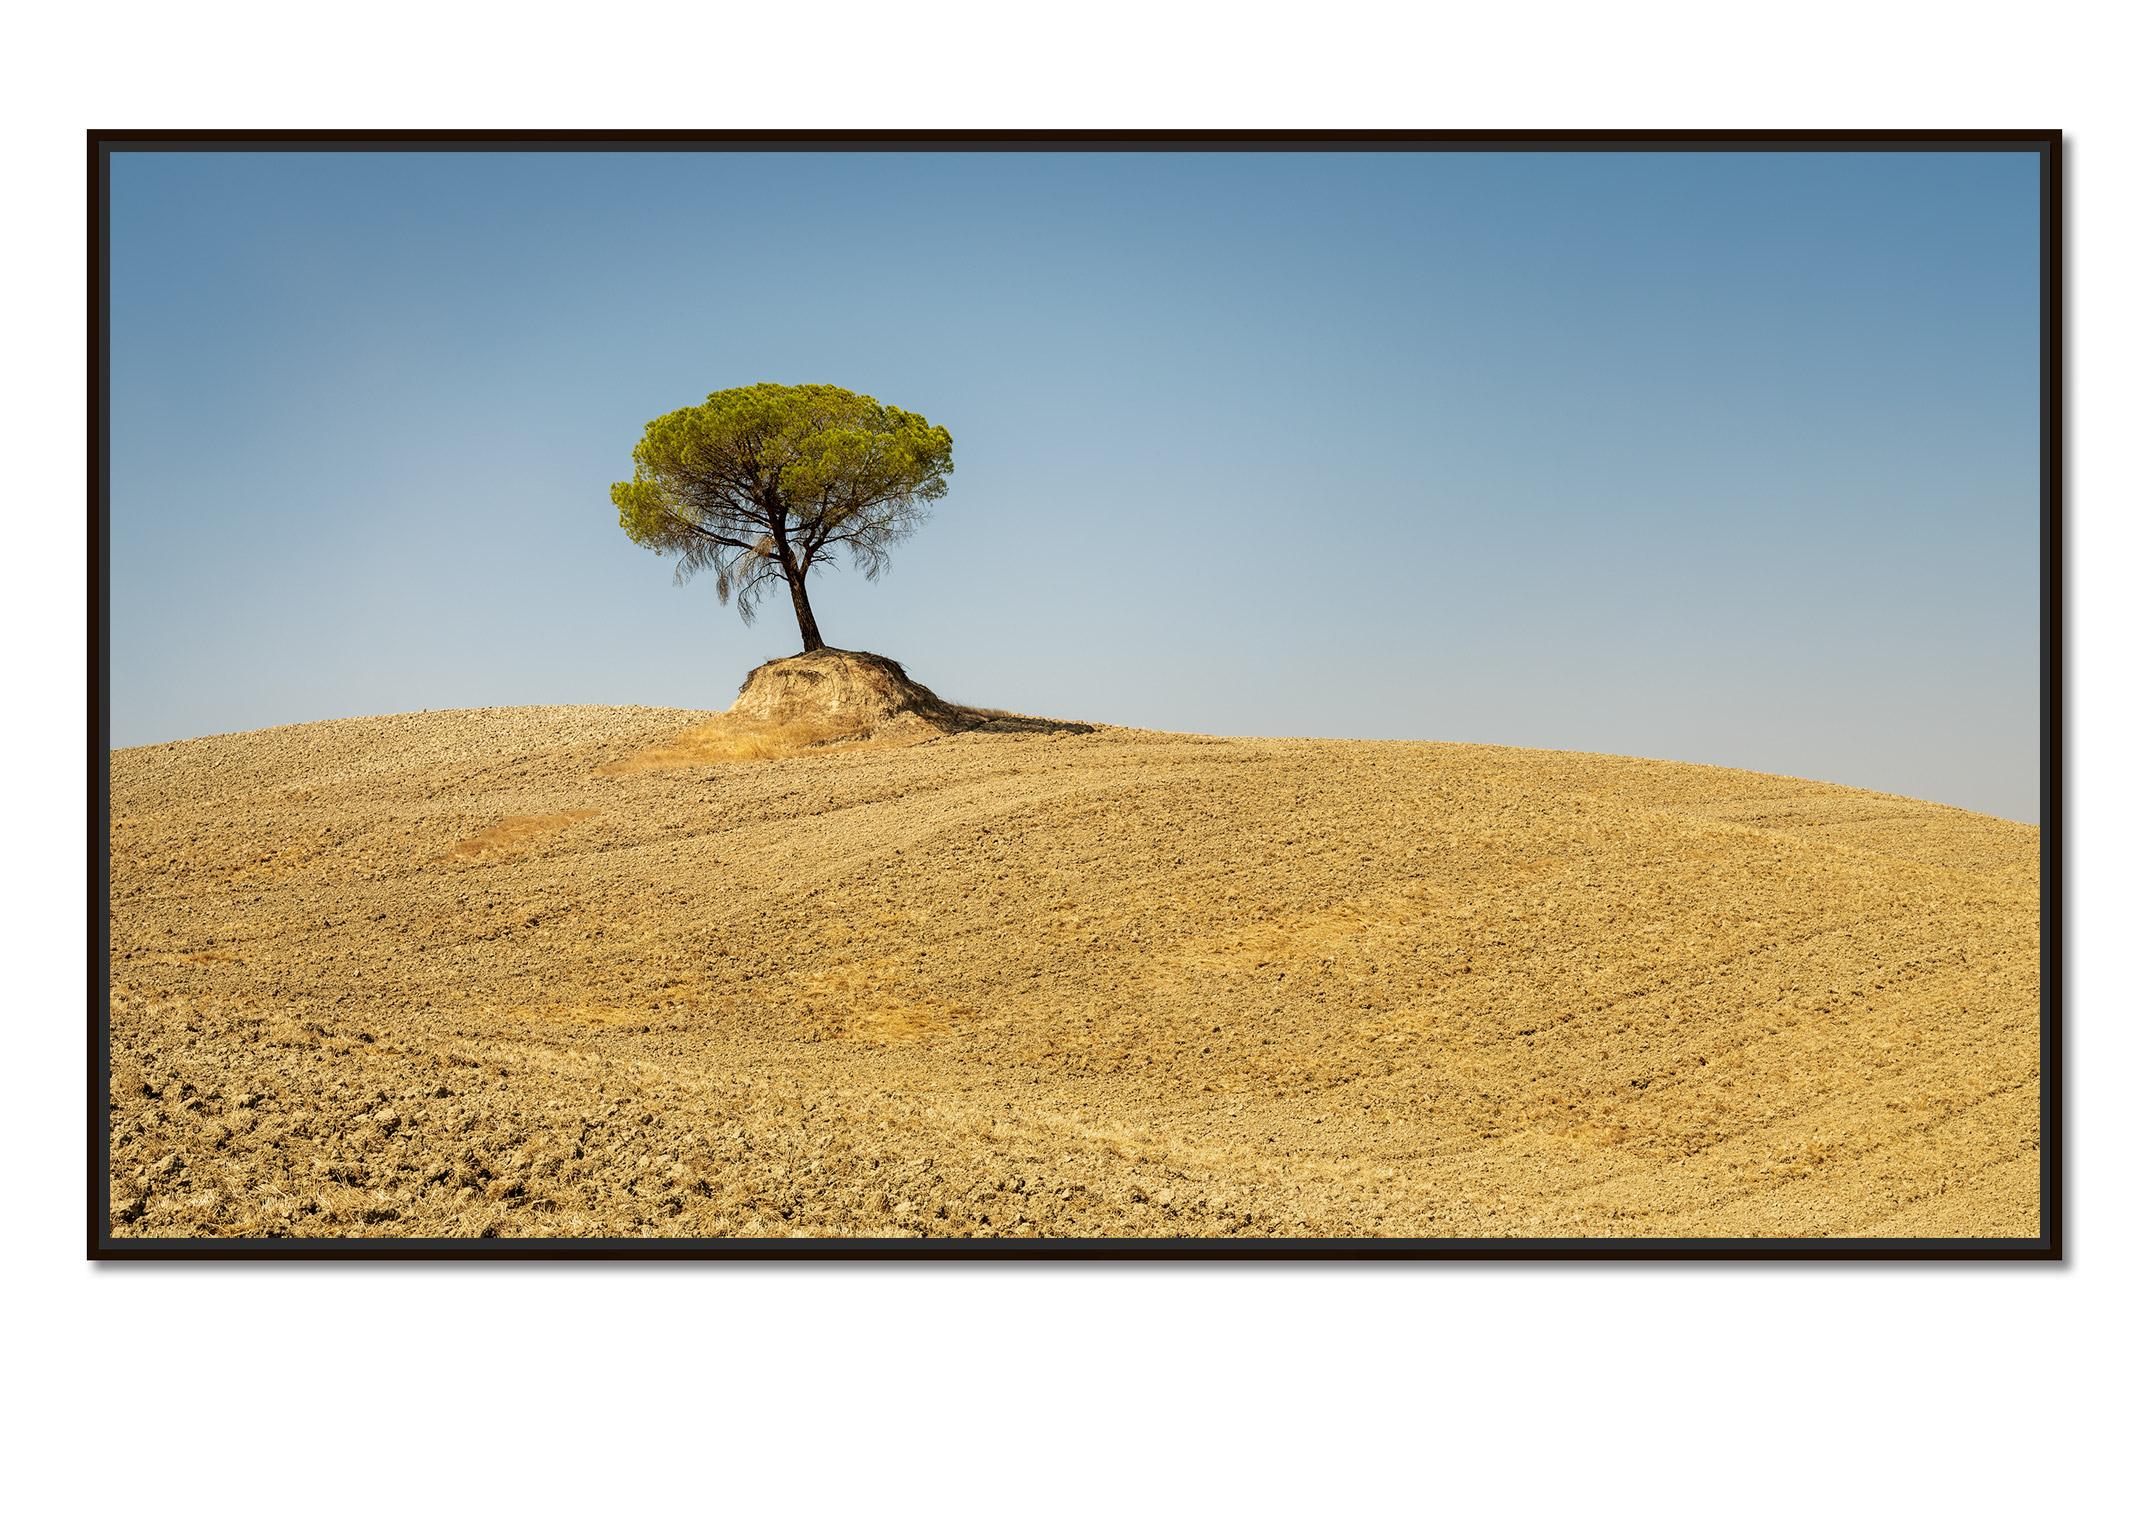 Italian Stone Pines, Tree, Tuscany, Italy, Colour art photography, landscape - Photograph by Gerald Berghammer